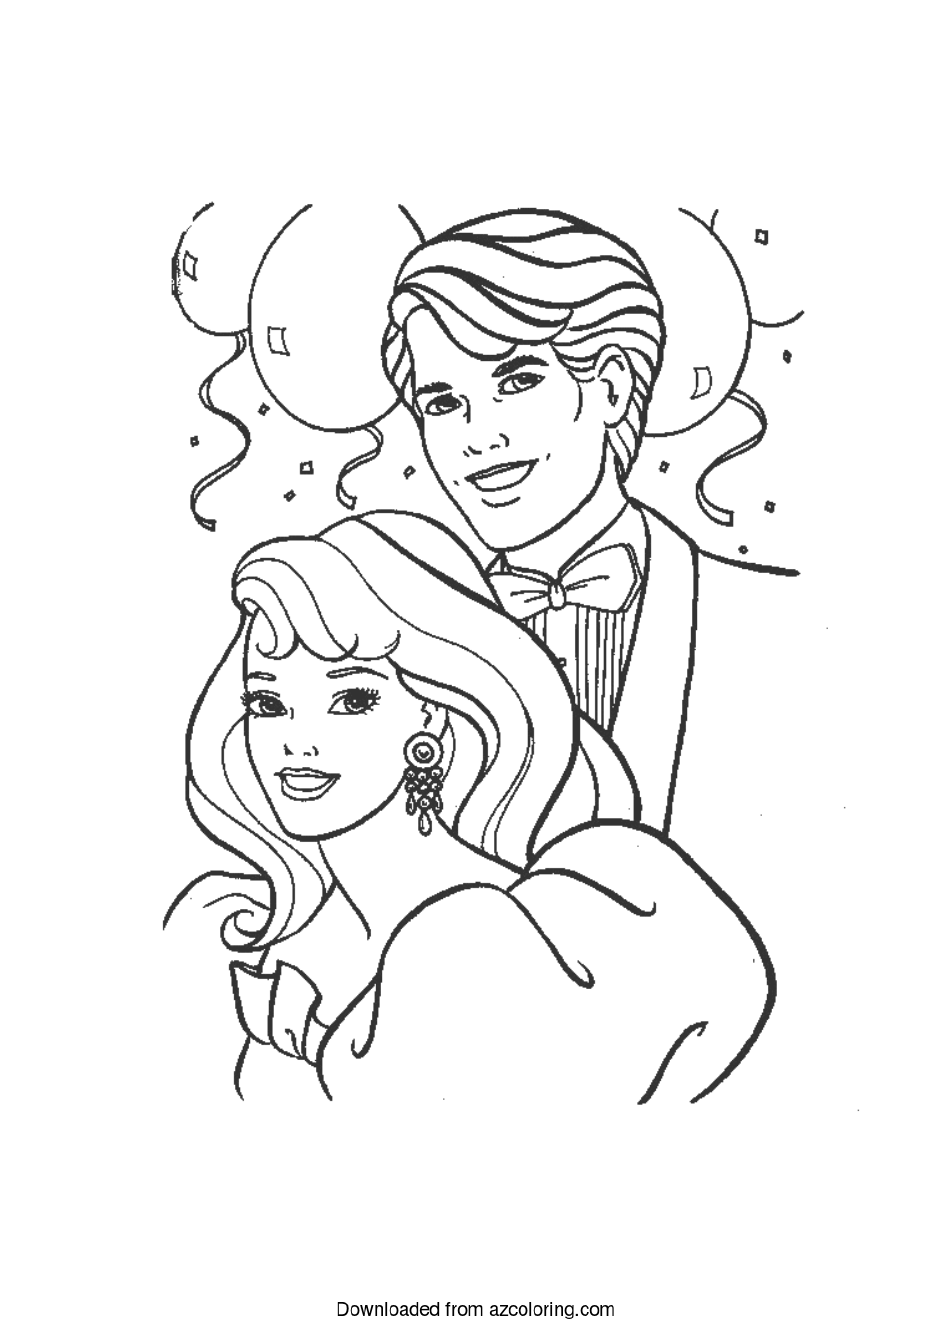 Wedding Couple Coloring Page Download Printable PDF | Templateroller